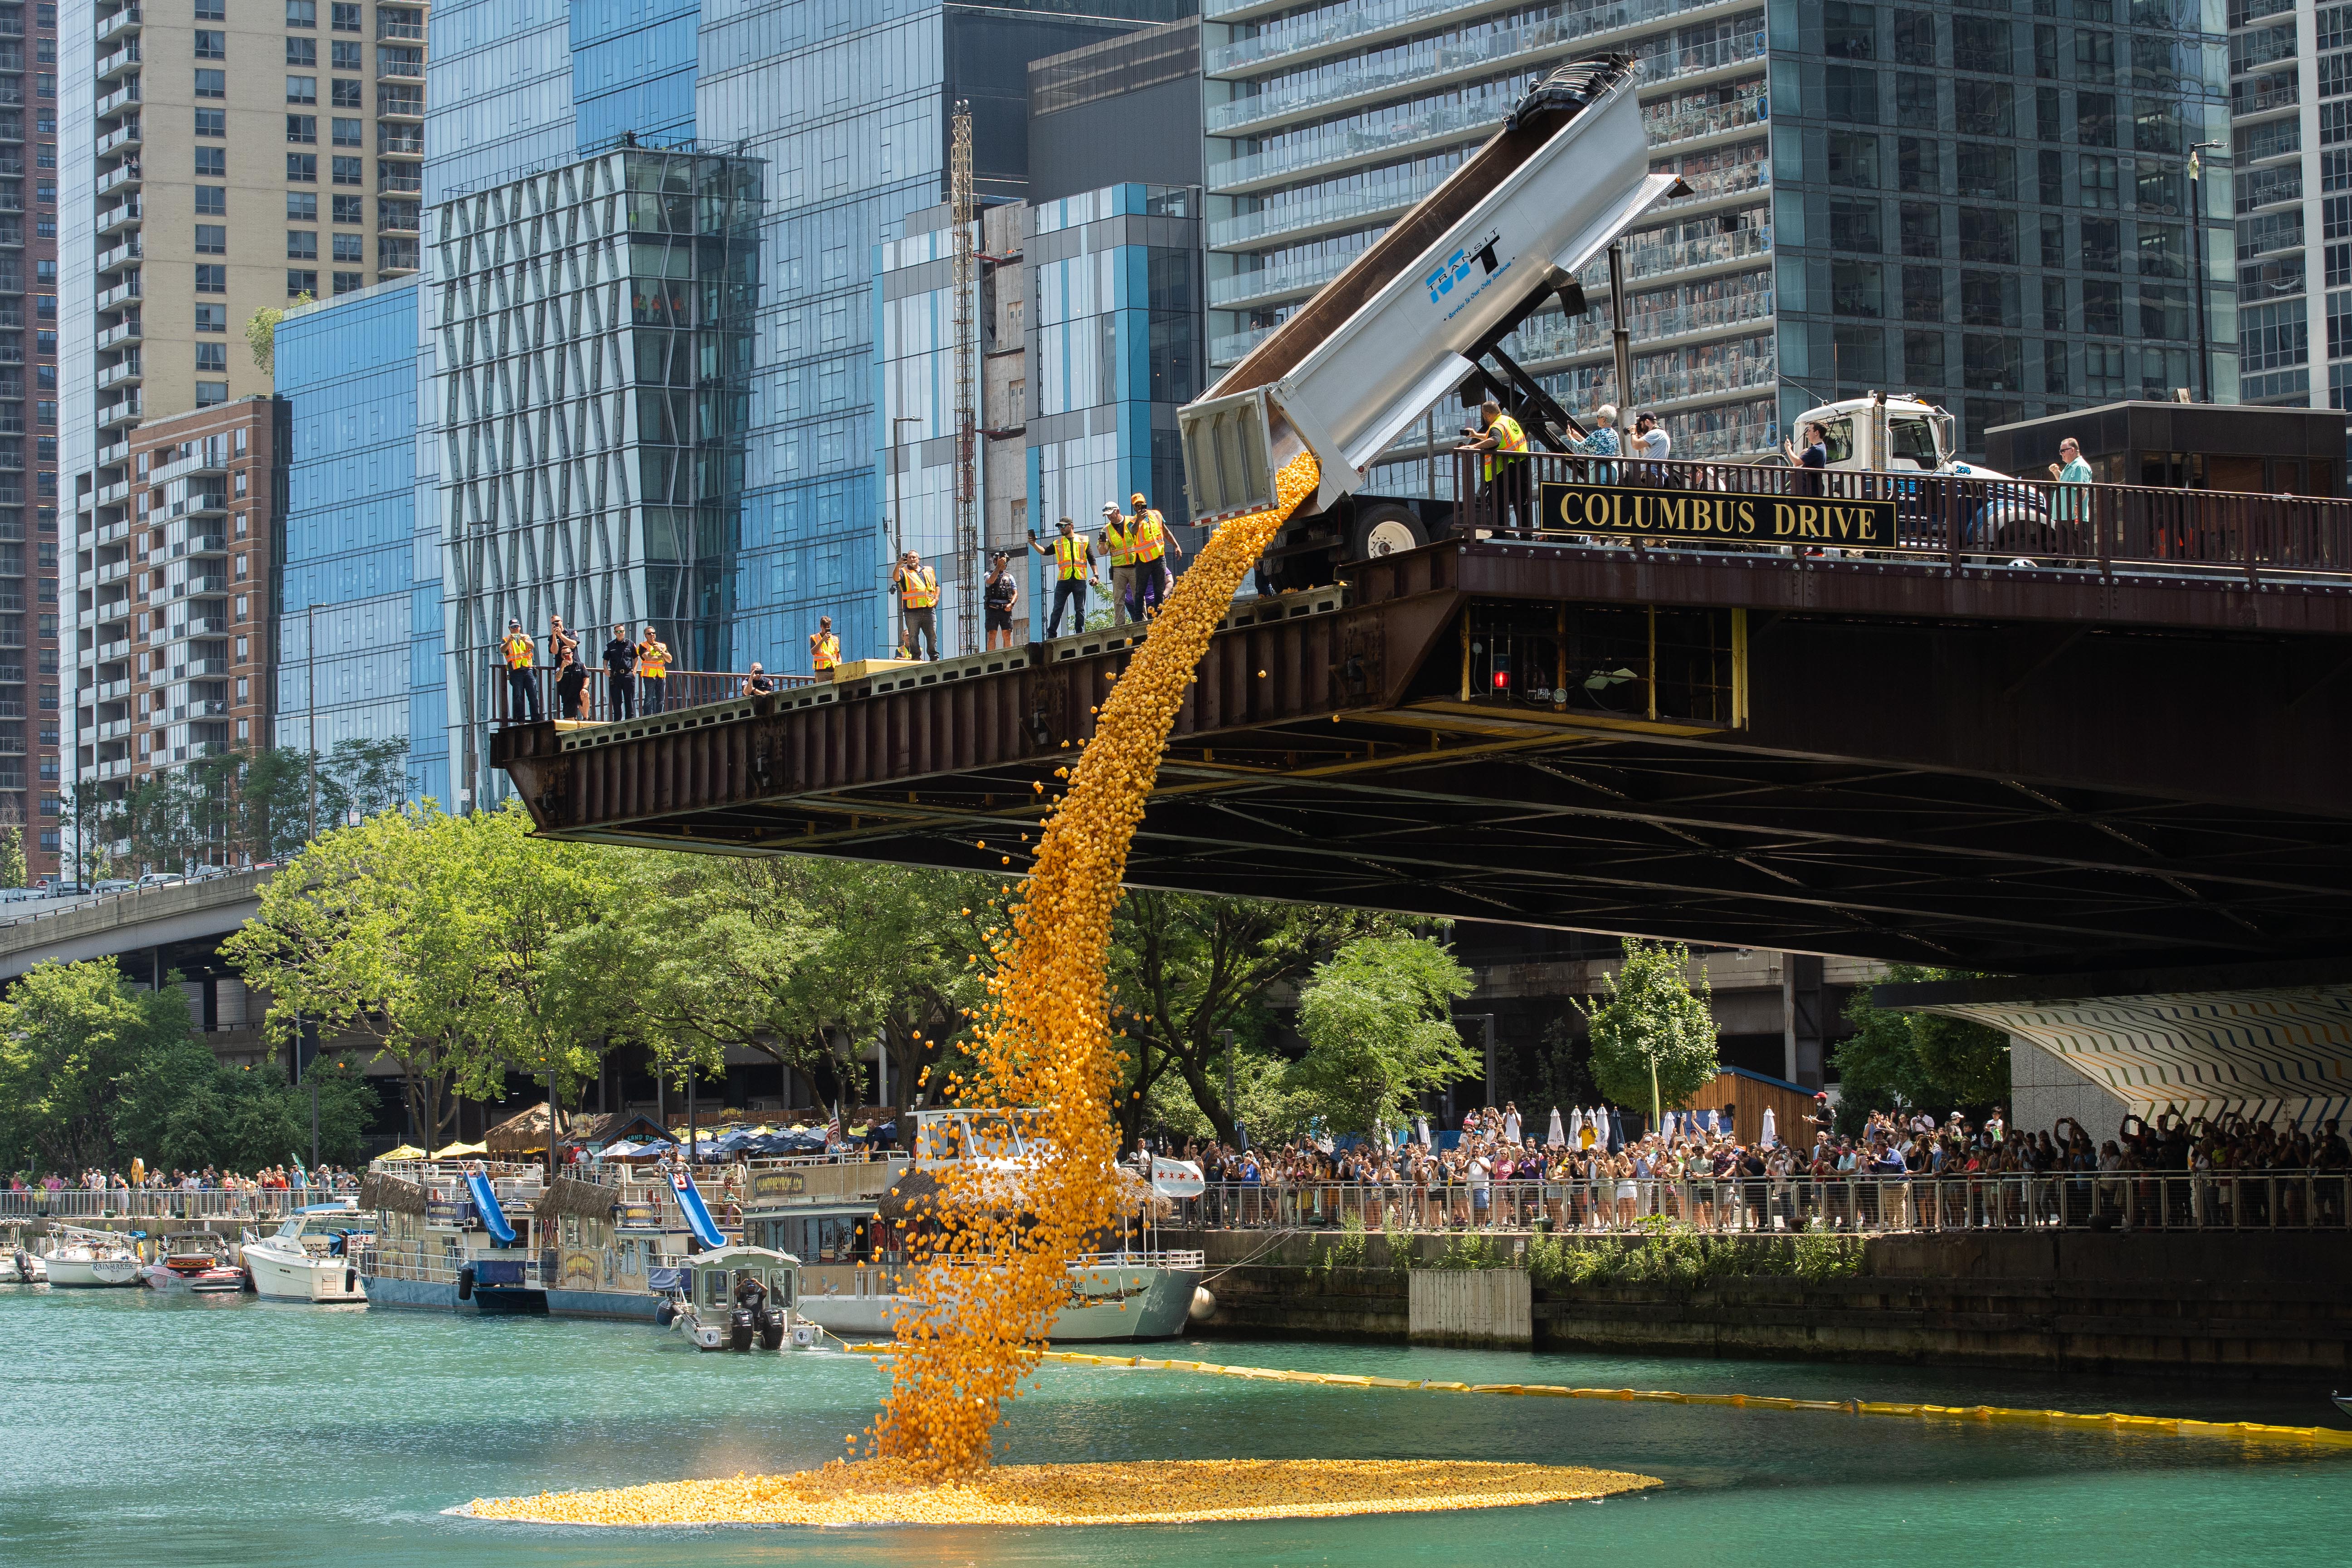 70,000 rubber ducks are thrown into the Chicago River near the Columbus Bridge in the Loop during the Chicago Ducky Derby, Thursday afternoon, Aug. 5, 2021. The Chicago Ducky Derby was held to raise funds for Special Olympics Illinois. 